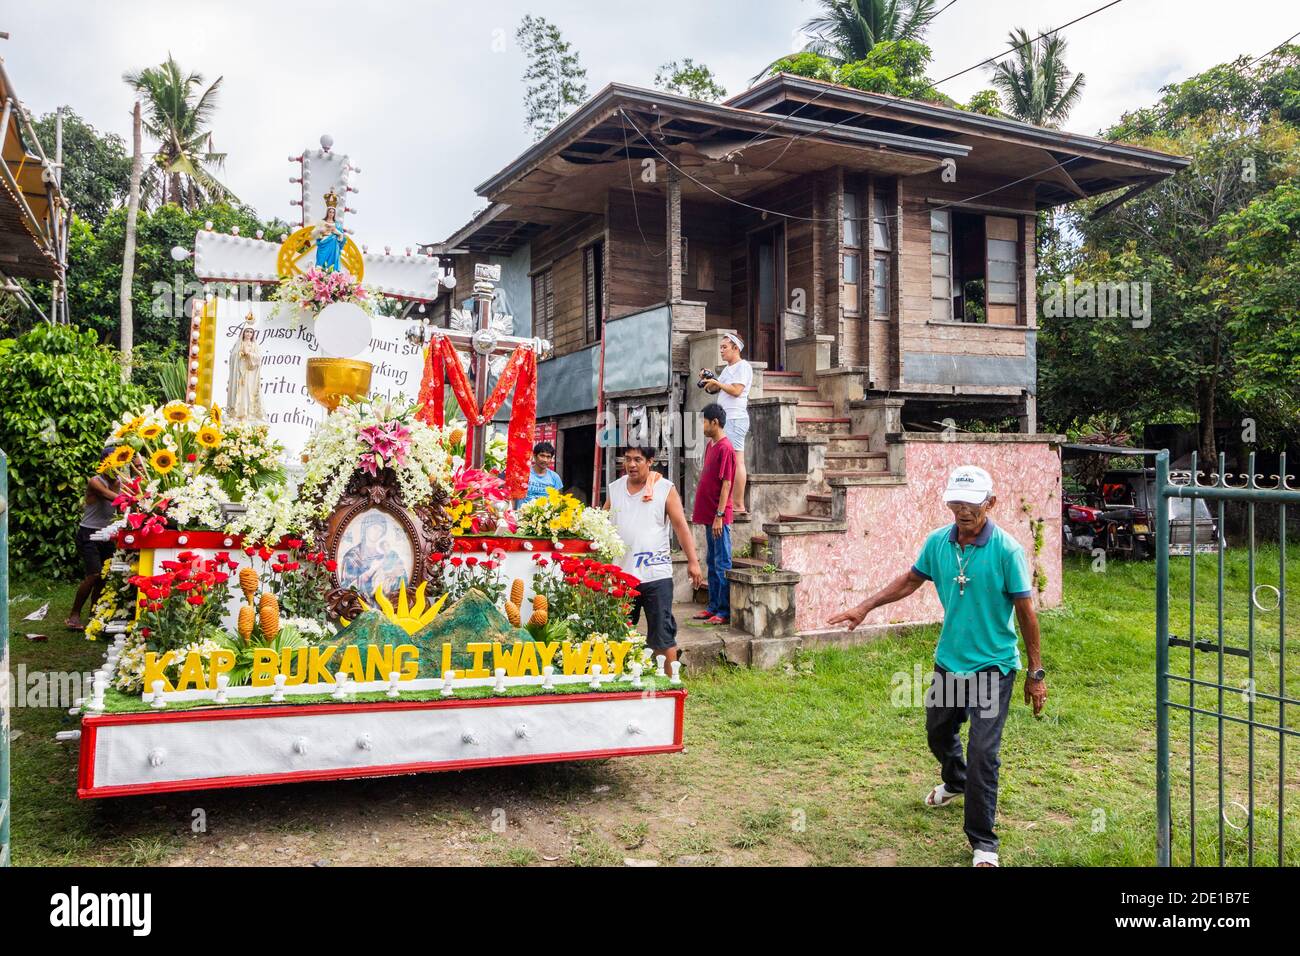 A fully decked festival float moves out of a residence grounds where it will participate in the procession during the May Flower Tapusan Festival in A Stock Photo